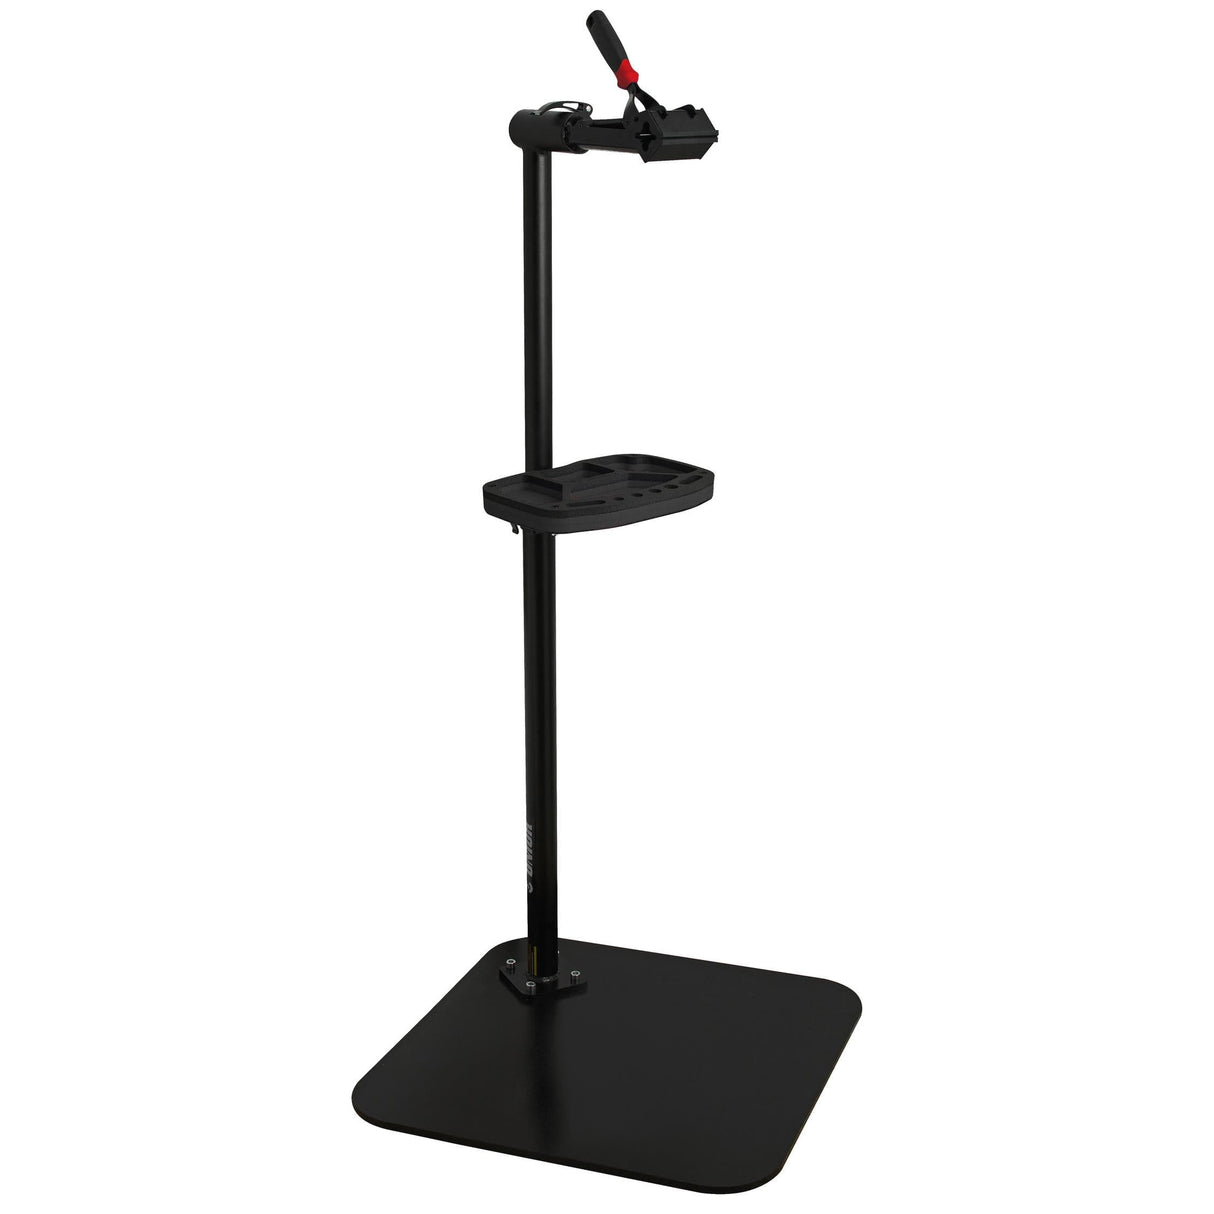 Unior Pro Repair Stand With Single Clamp, Auto Adjustable: Red